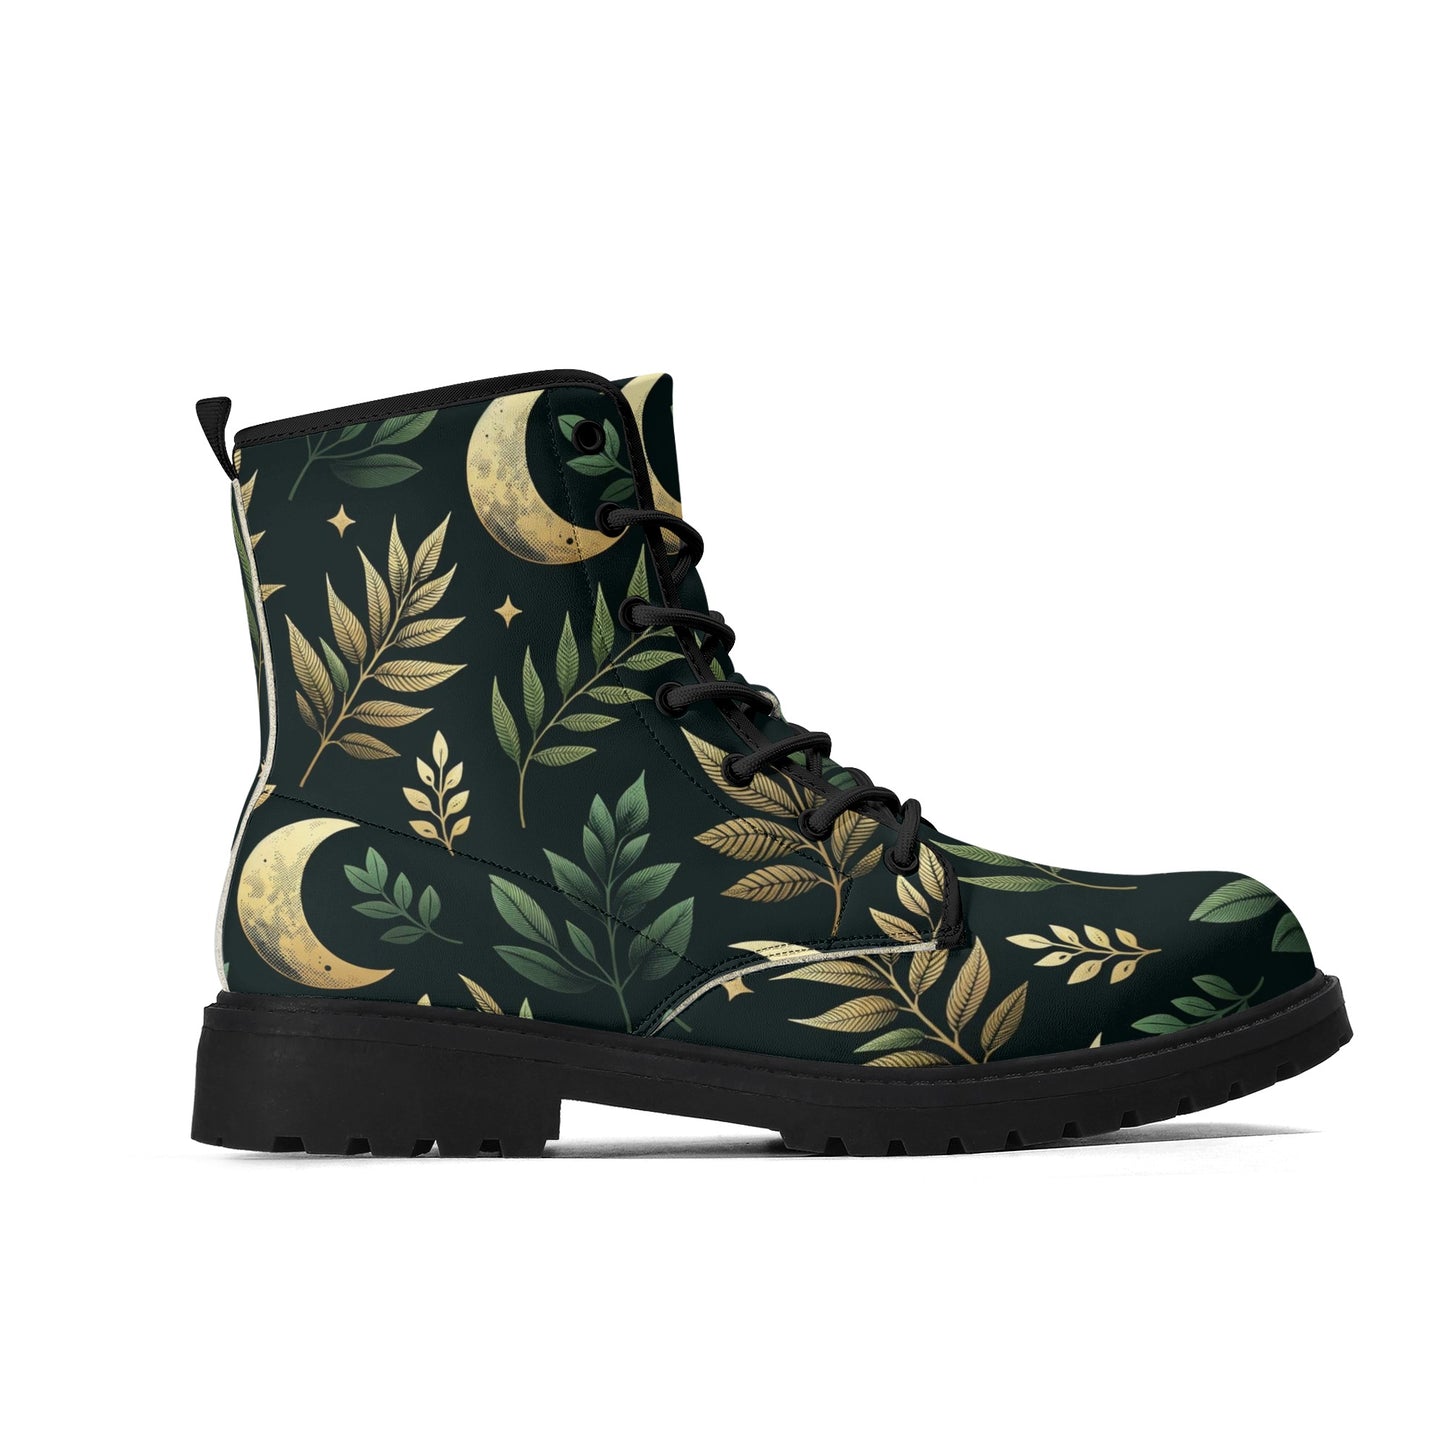 Forest Moon Women Leather Boots, Witchy Boho Green Vegan Lace Up Shoes Hiking Festival Black Ankle Combat Work Cottagecore Waterproof Ladies